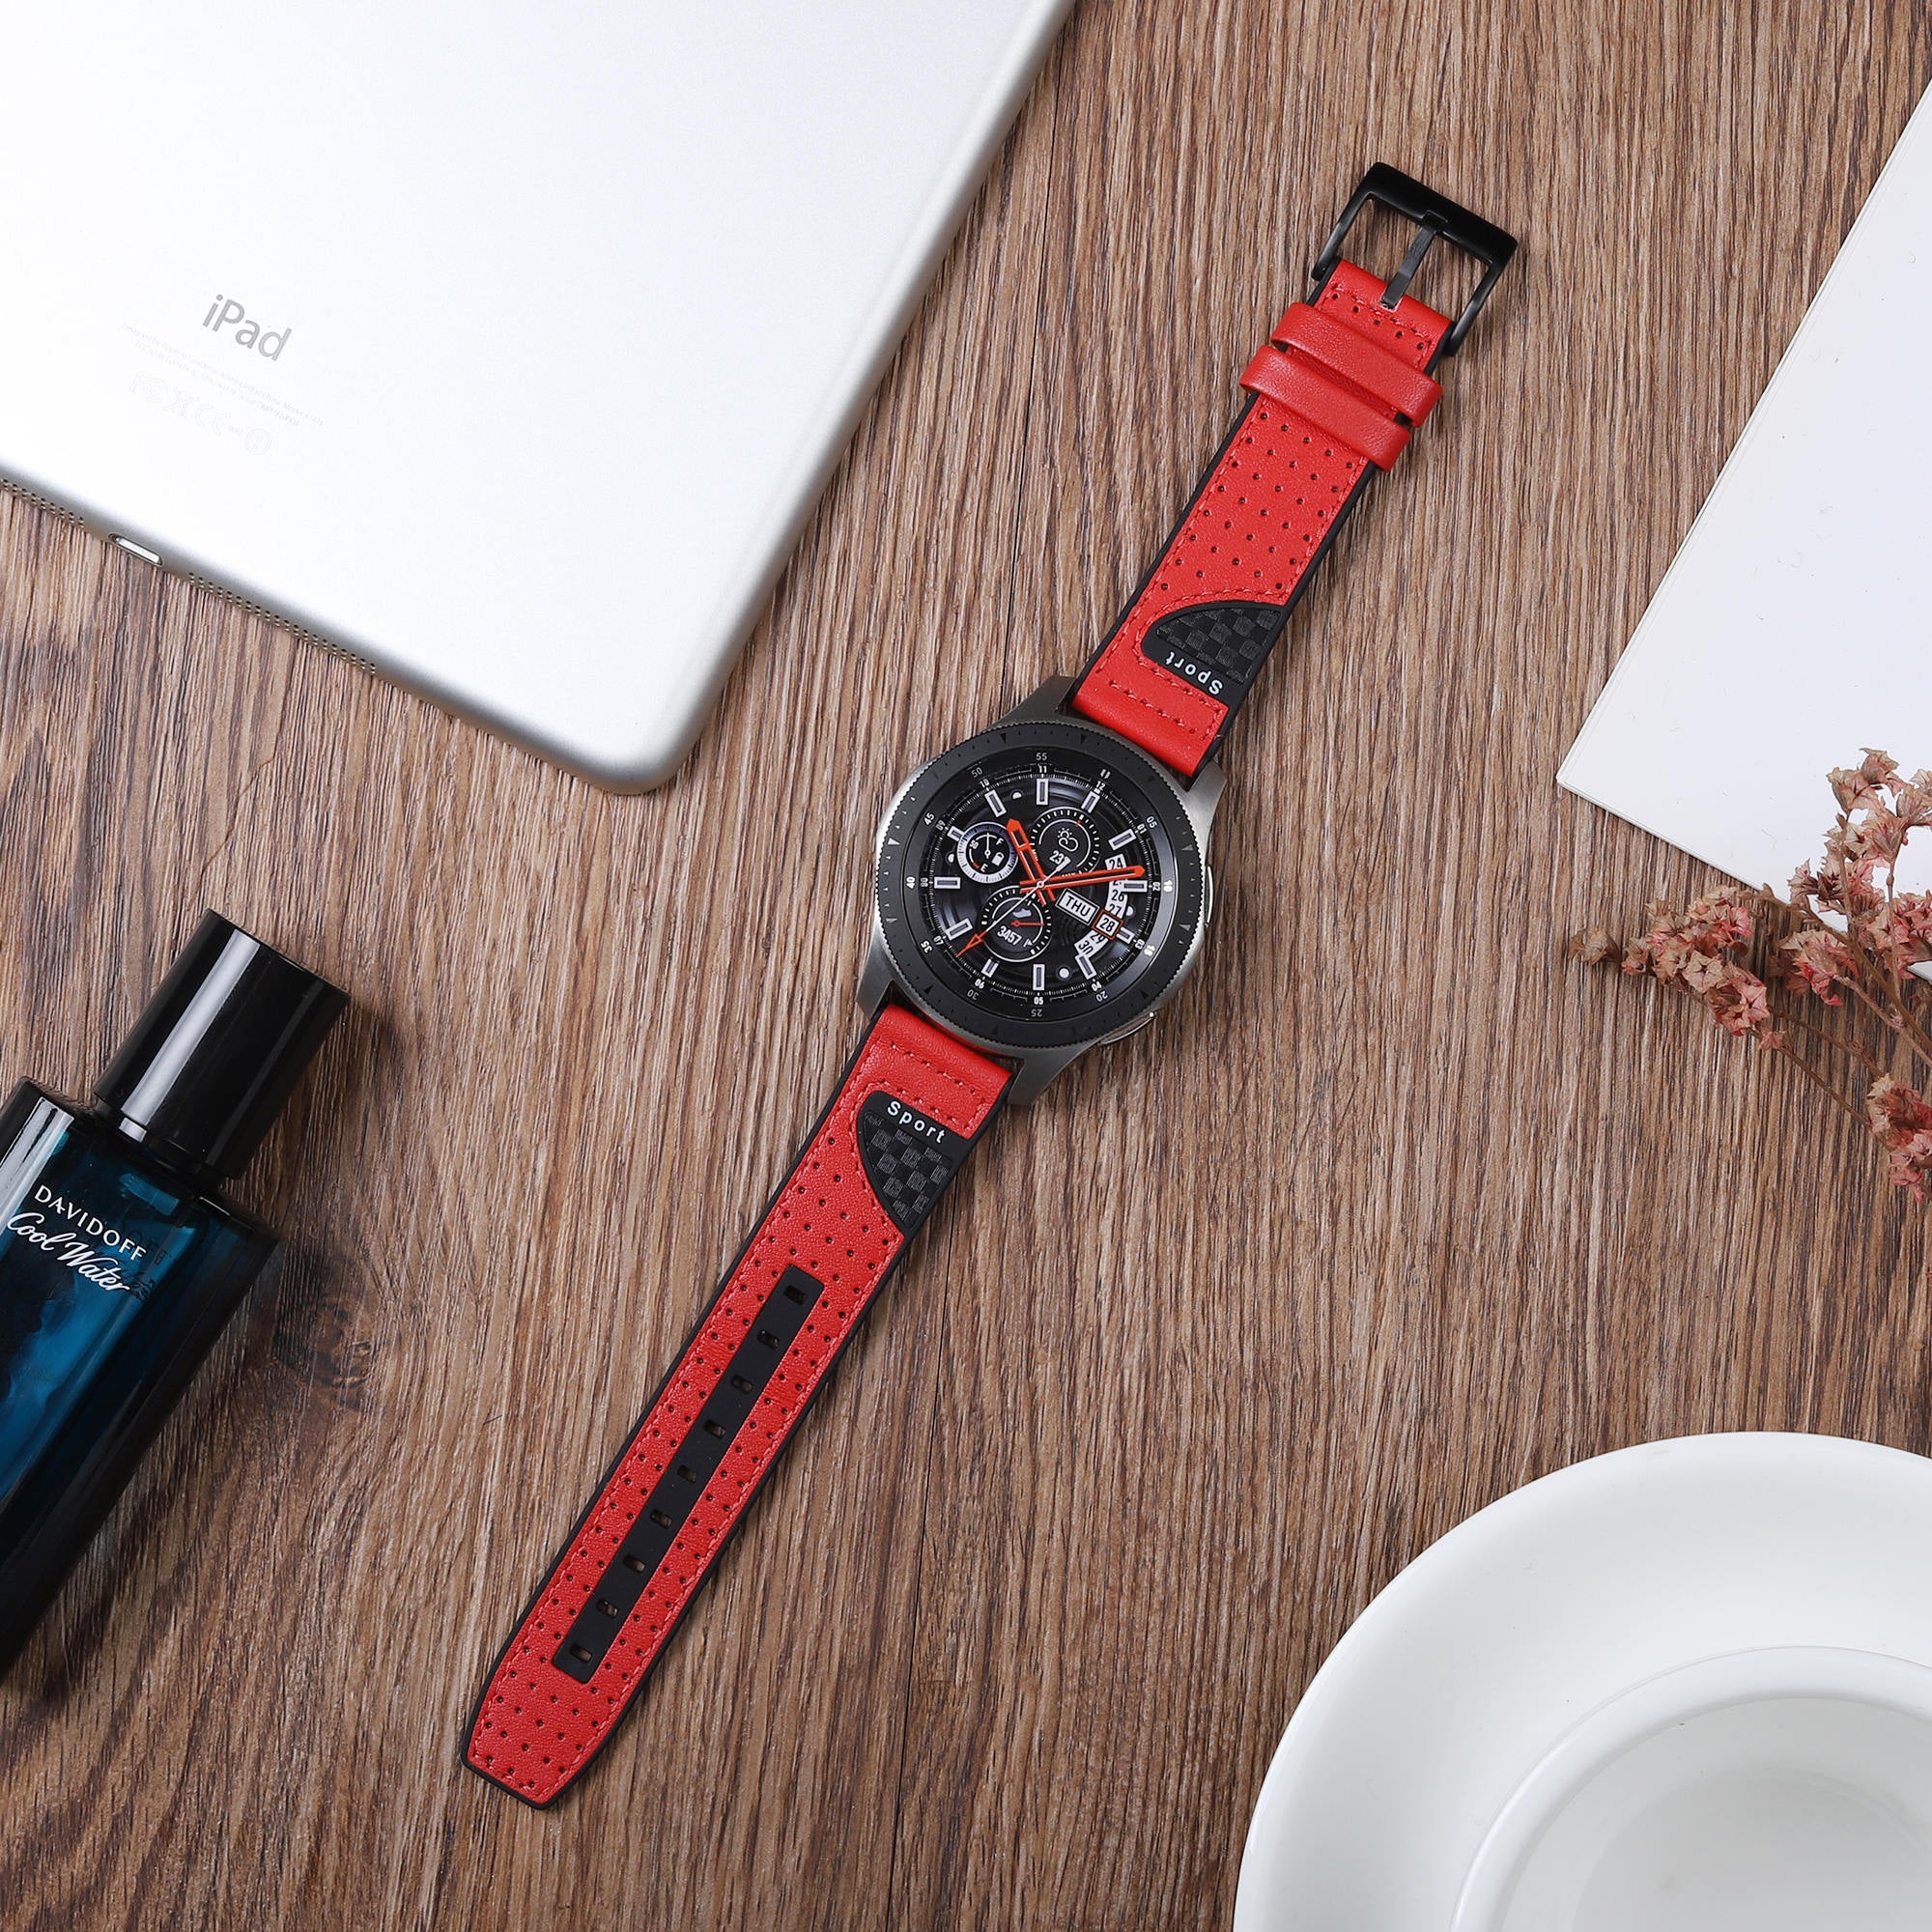 22mm Carbon Fiber Leather Coated Silicone Watch Strap for Huawei Watch GT2/Galaxy Watch 46mm etc. - Red